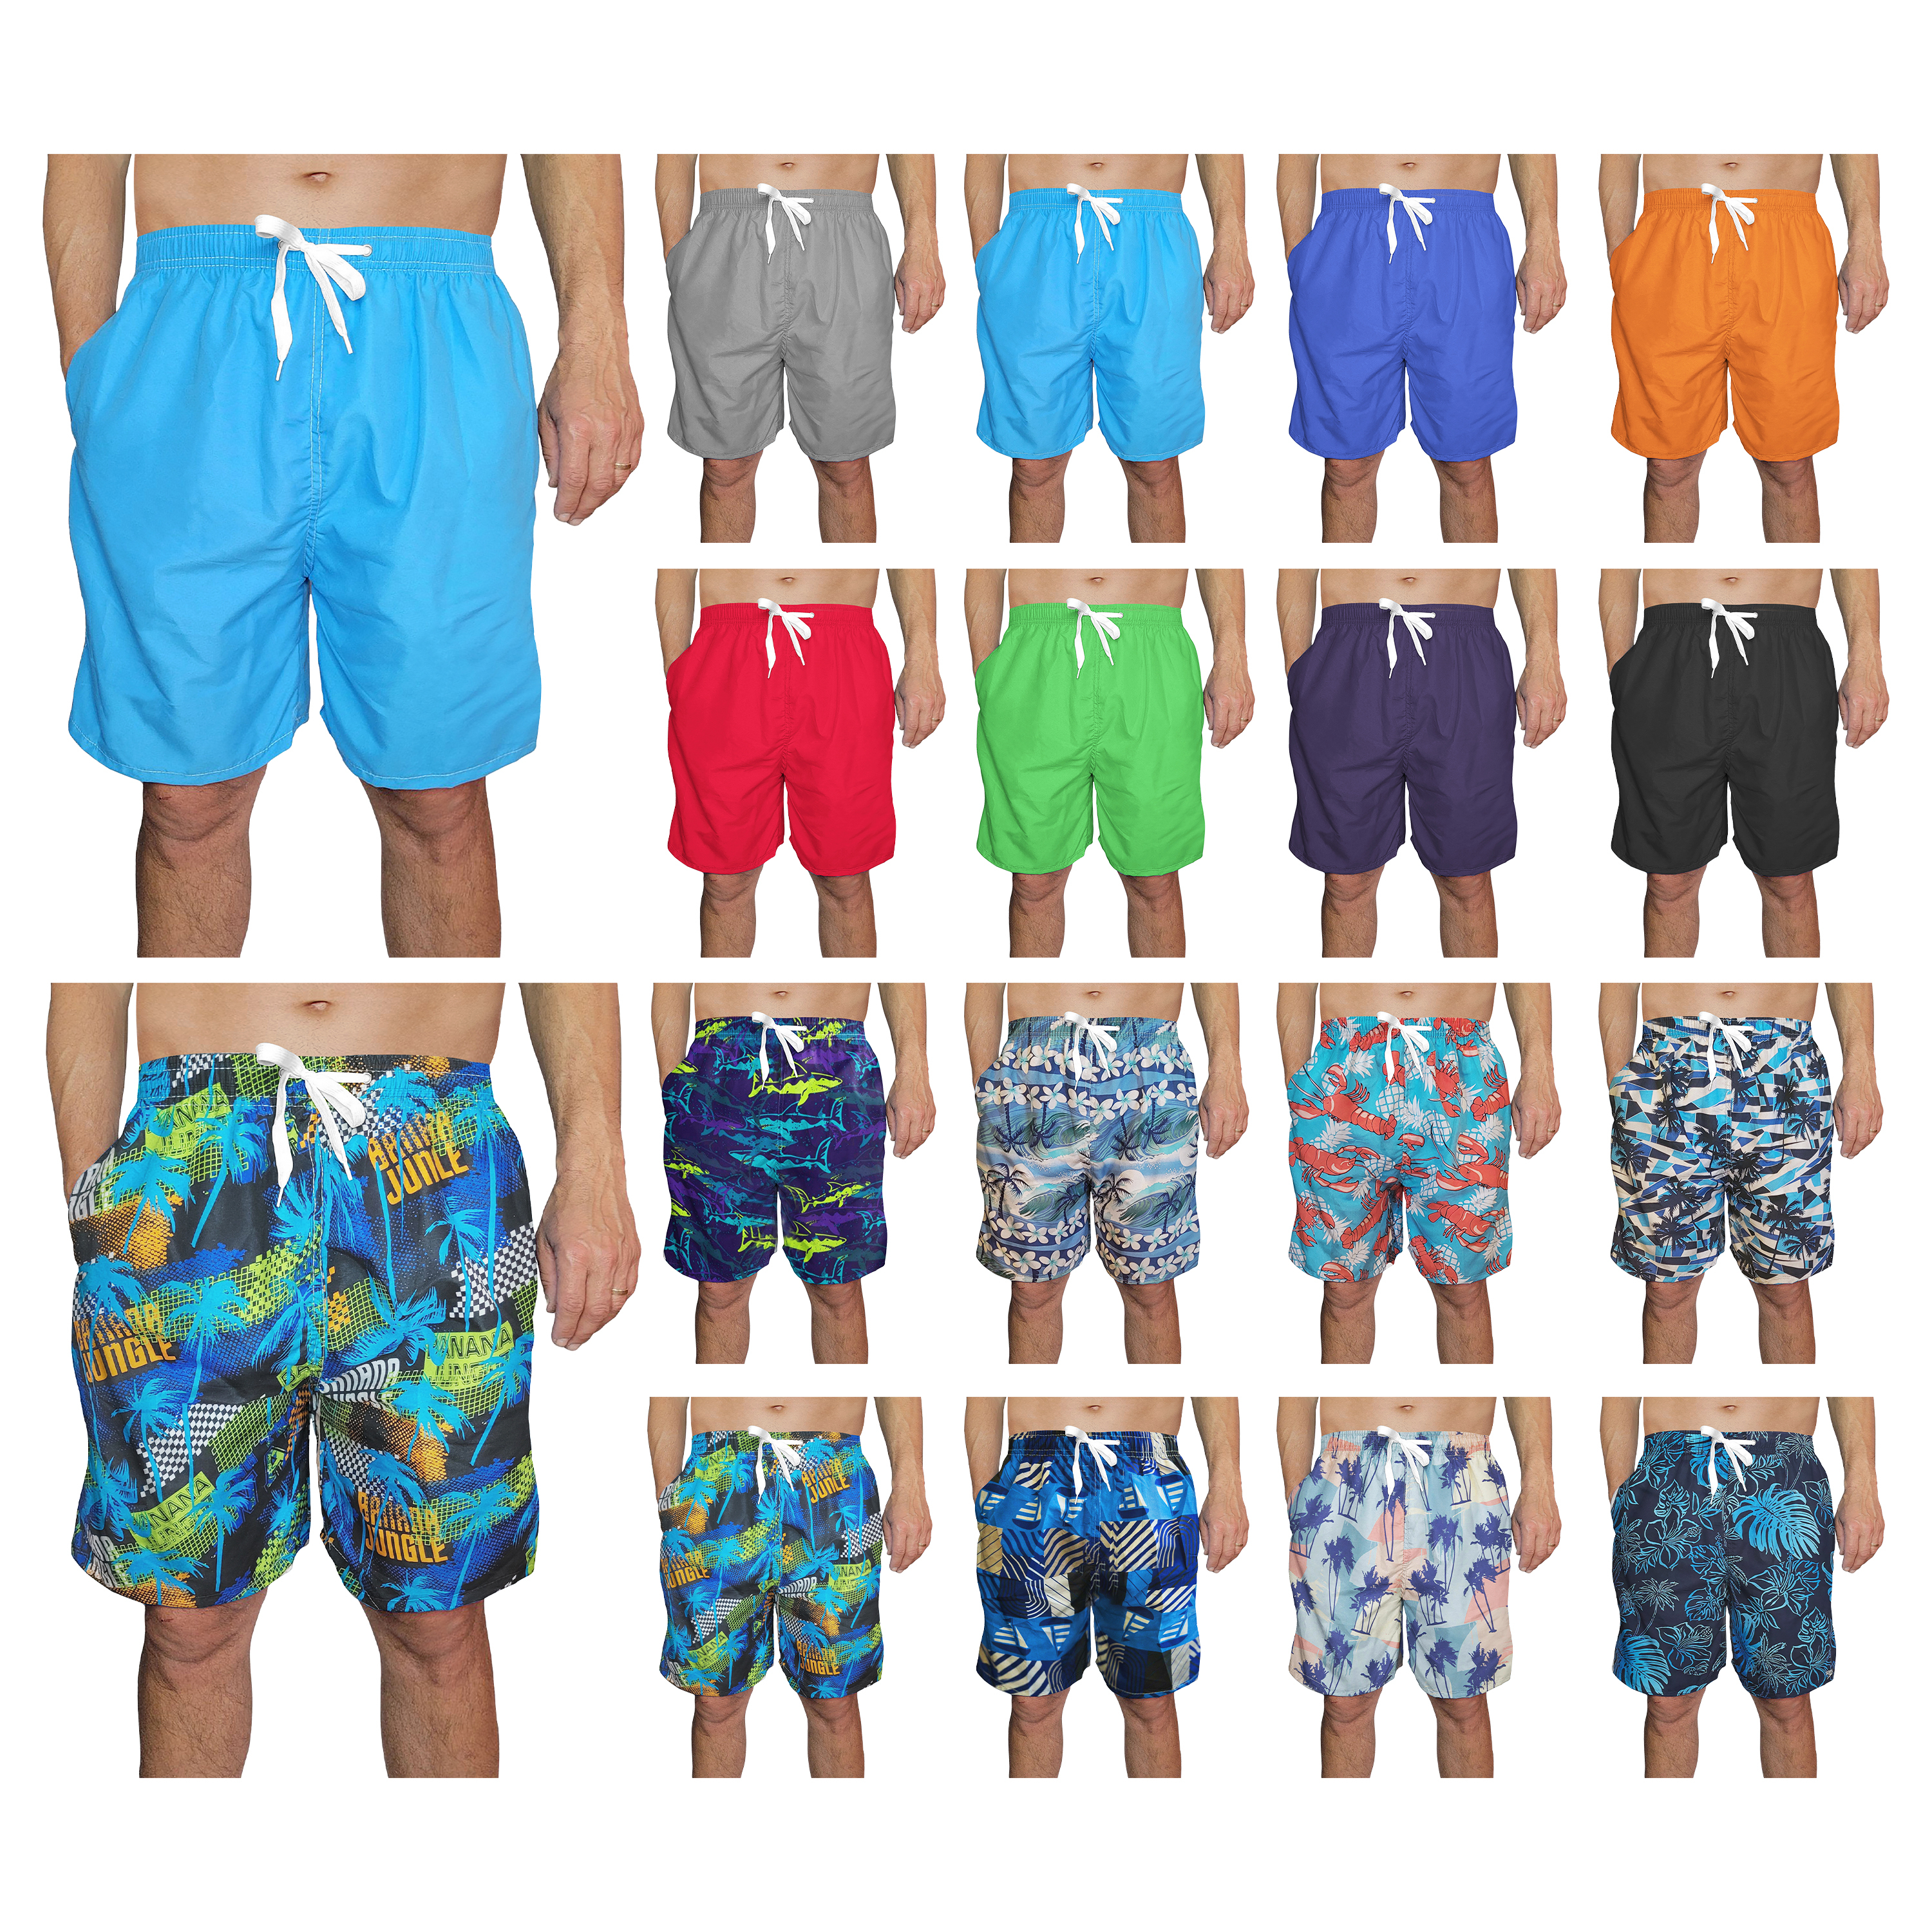 3-Pack: Men's Quick-Dry Solid & Printed Summer Beach Surf Board Swim Trunks Shorts - Small, Solid